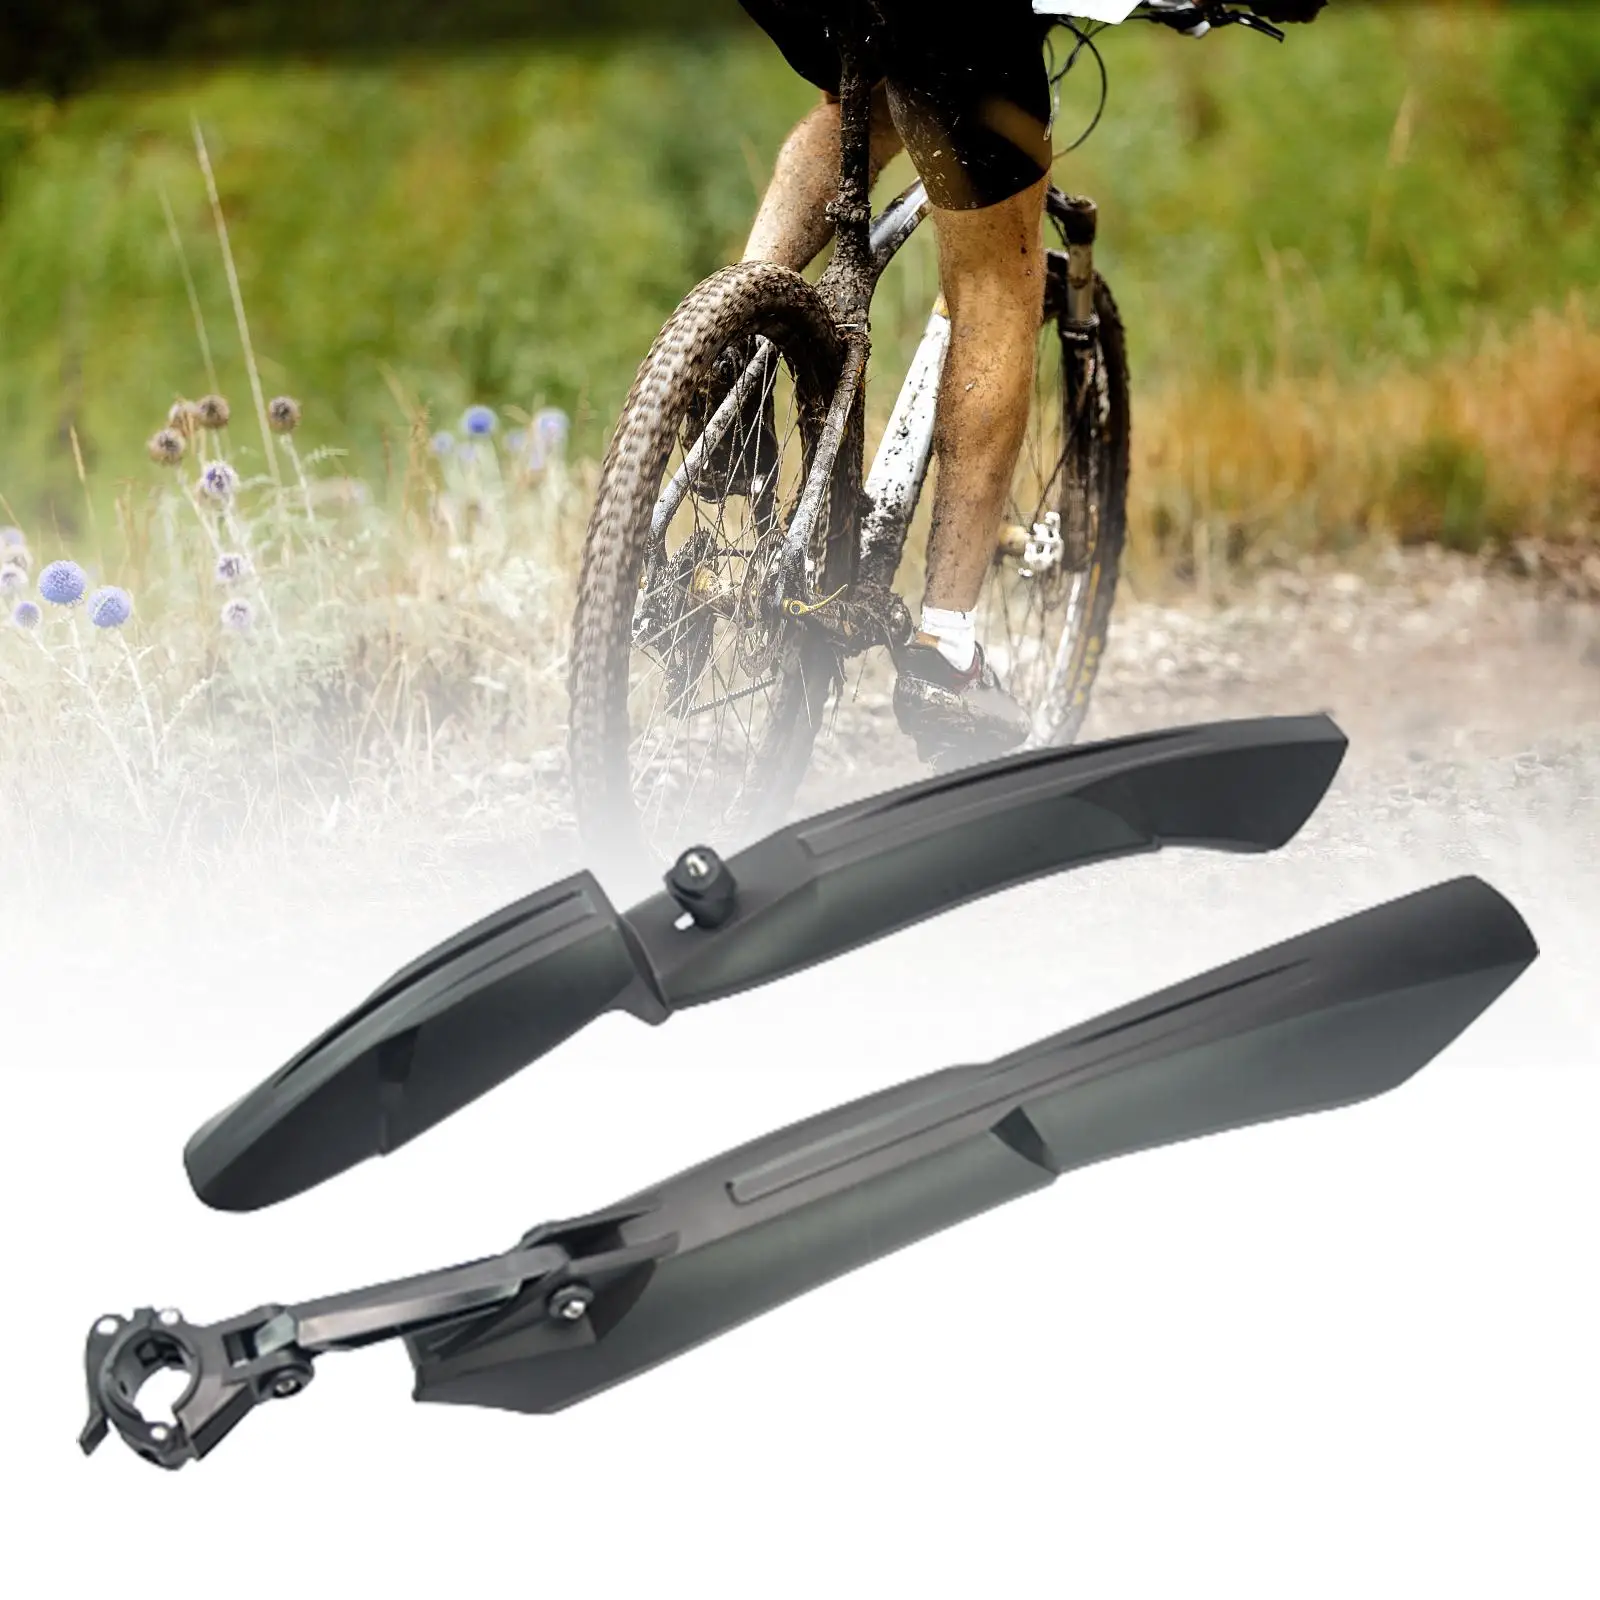 Bike Mud Guard Widen Lengthen Easy Installation Bike Fender Front Rear Set for Outdoor Road Bike Traveling Cycling Accessories